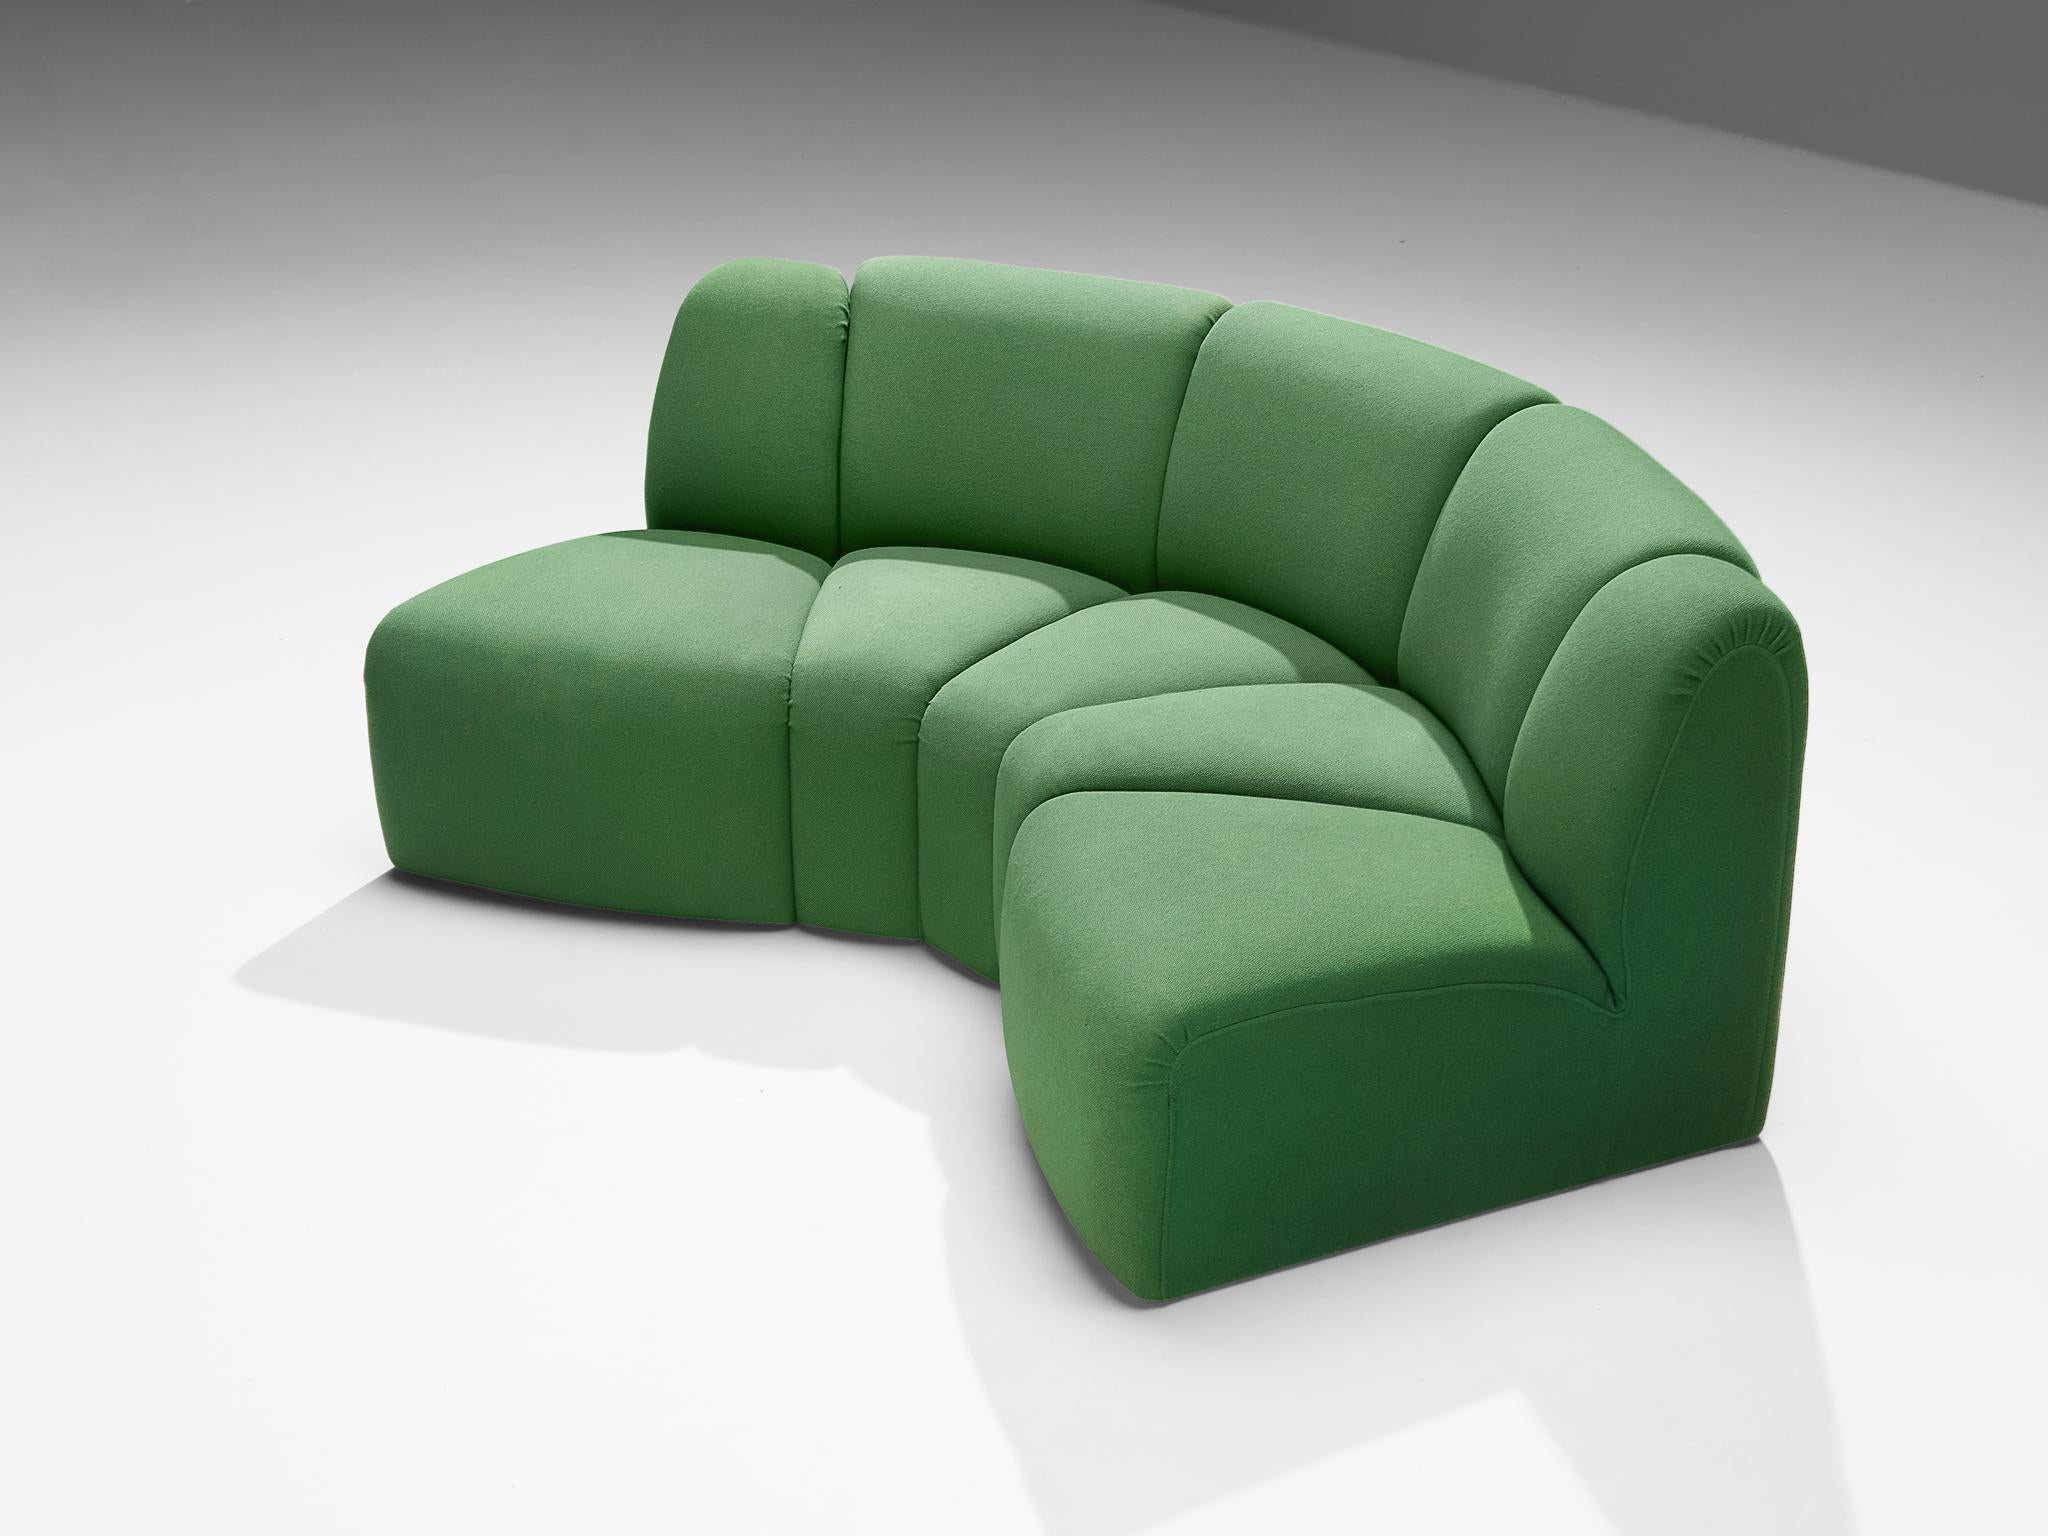 Pierre Paulin for Artifort, sectional sofa 'Mississippi', Belgium, 1978

French designer Pierre Paulin created the 'Mississippi' modular sofa in 1978. This sofa shows five elements that can be placed in different compositions, forming one large sofa